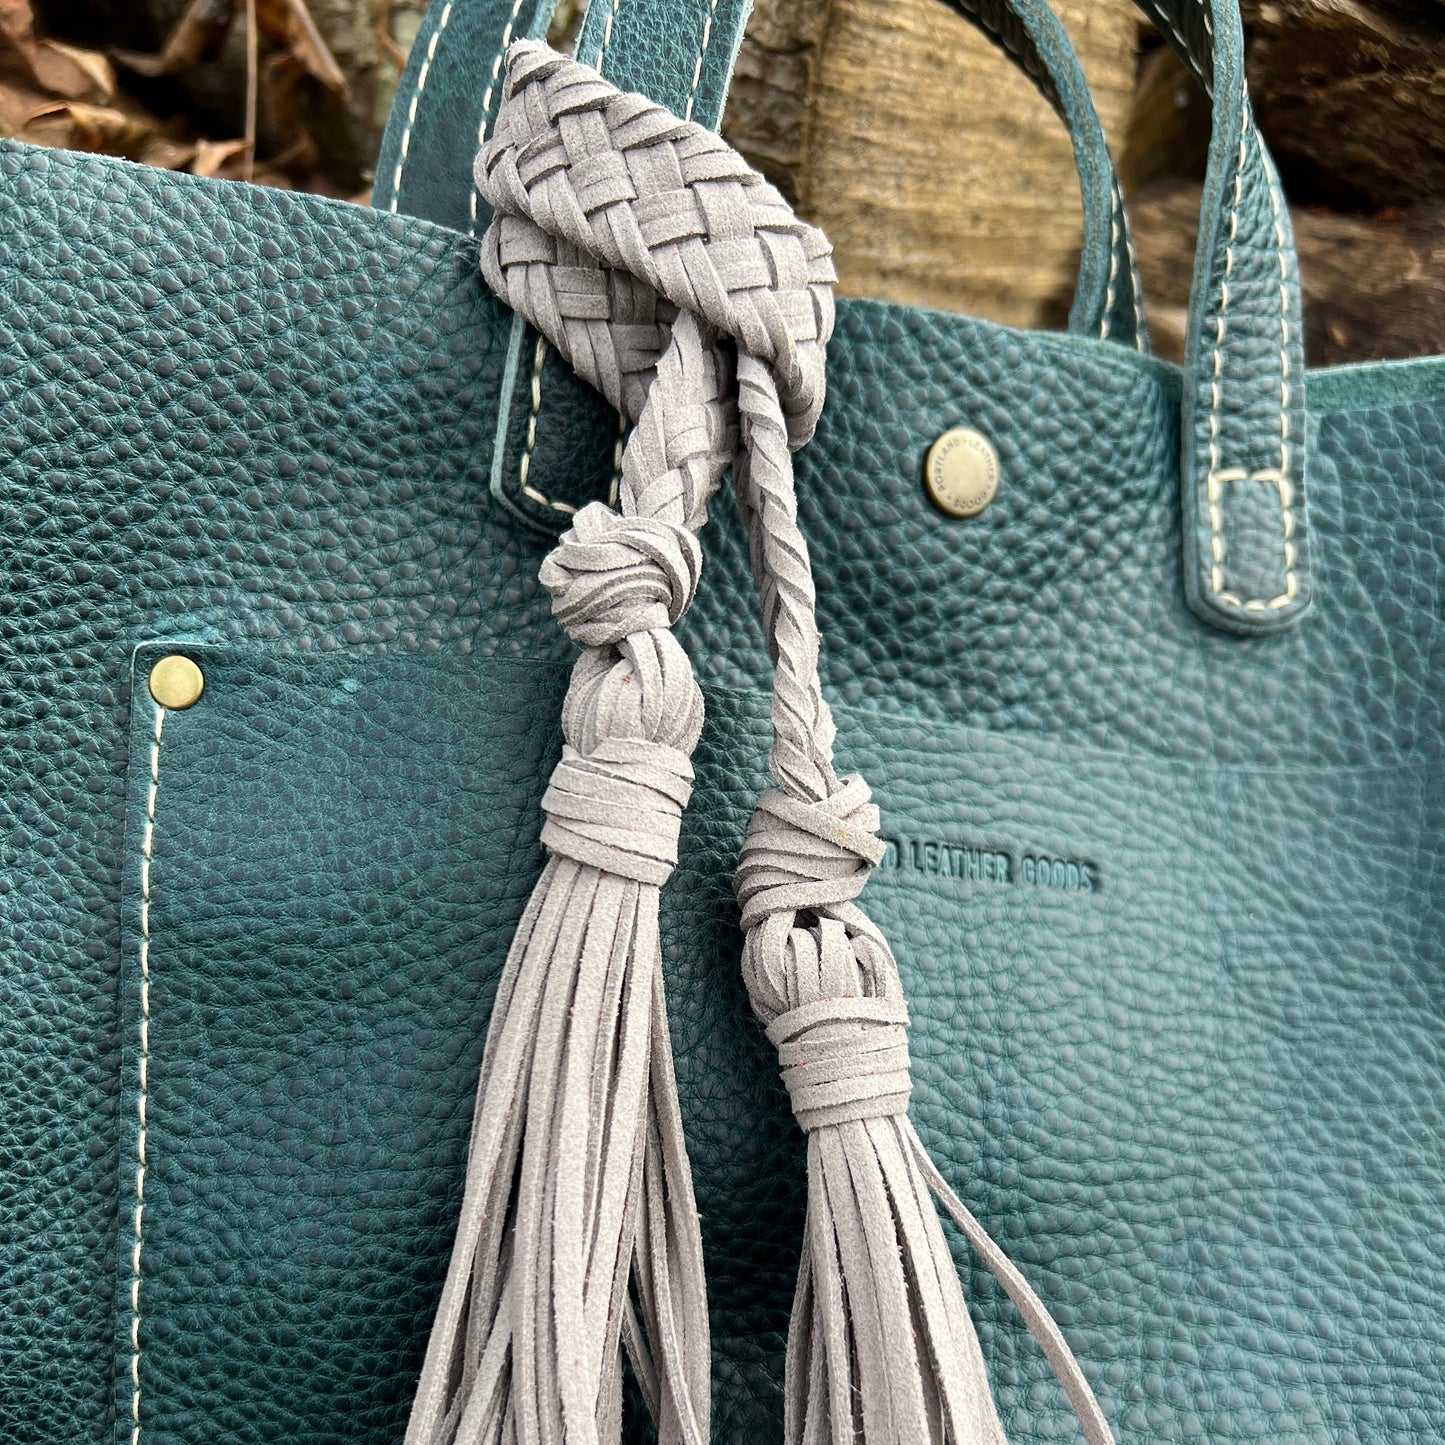 Bag Charm Deluxe Wide Braid with Tassels for Purses & Totes Faux Suede Leather